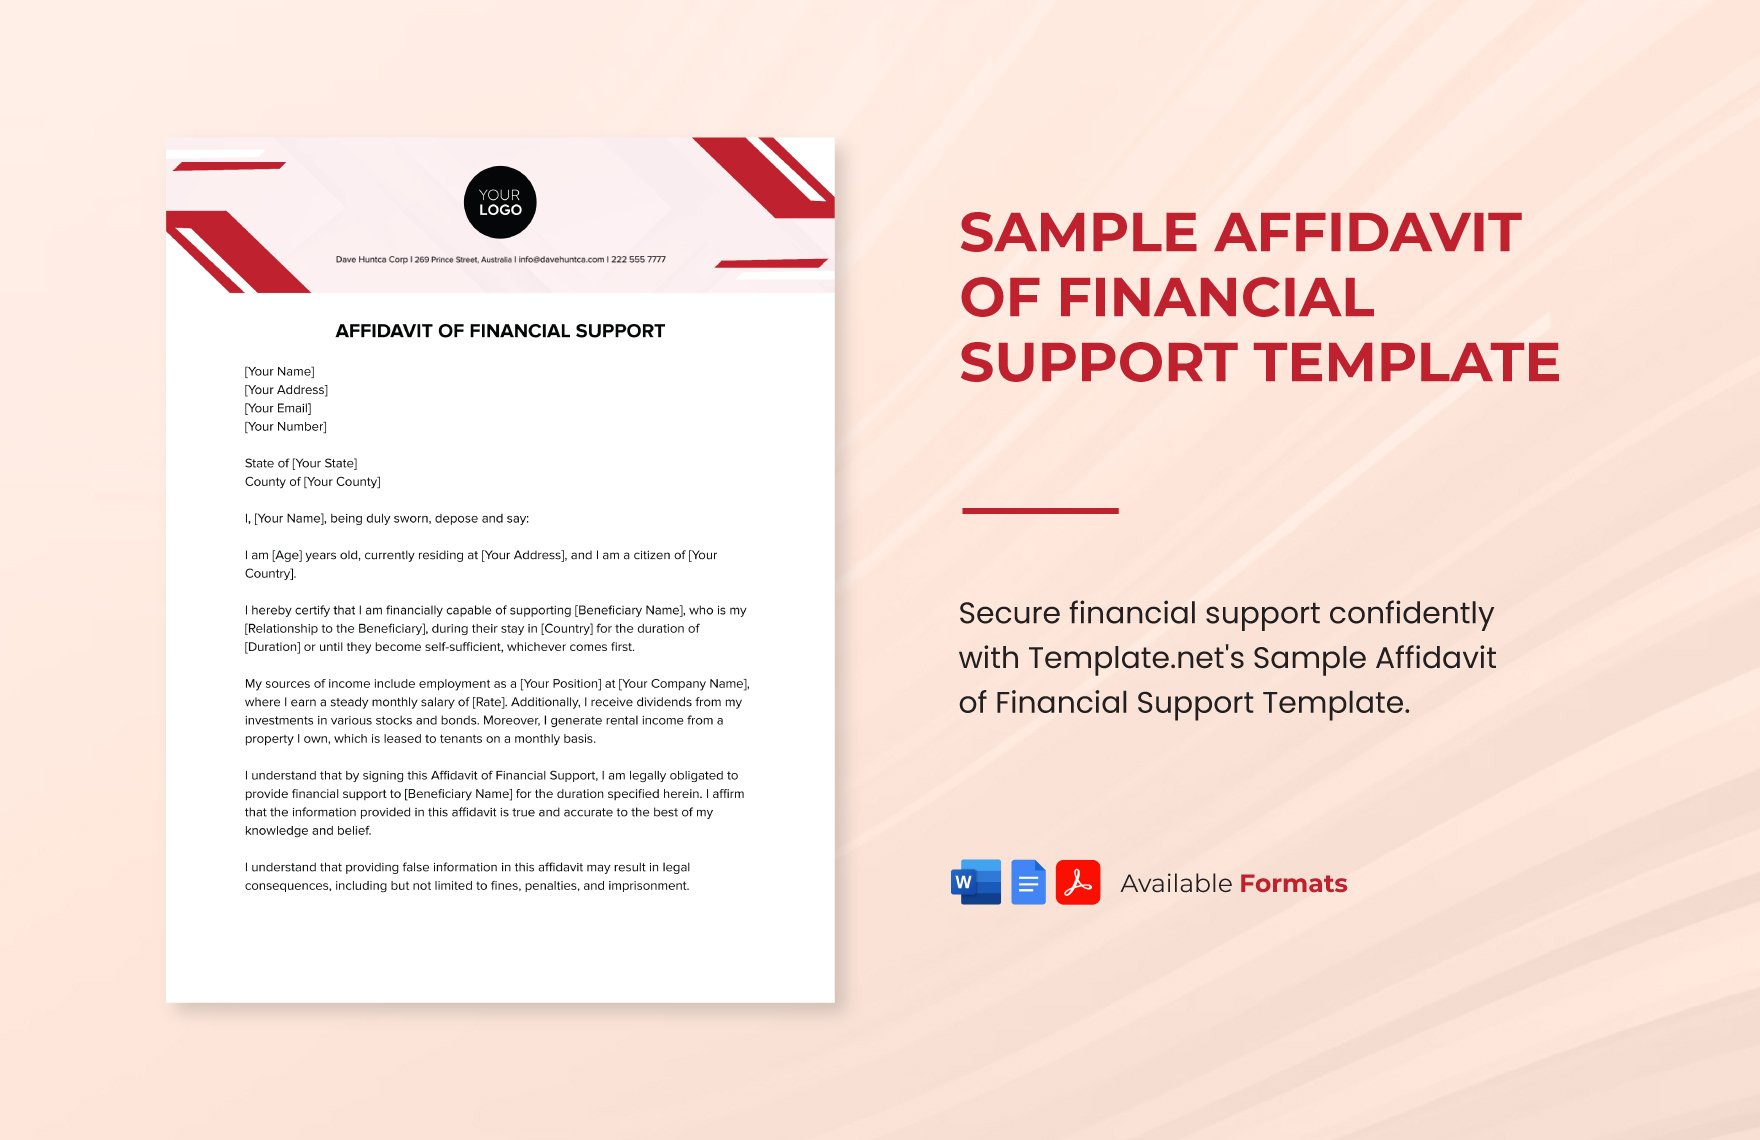 Free Sample Affidavit of Financial Support Template